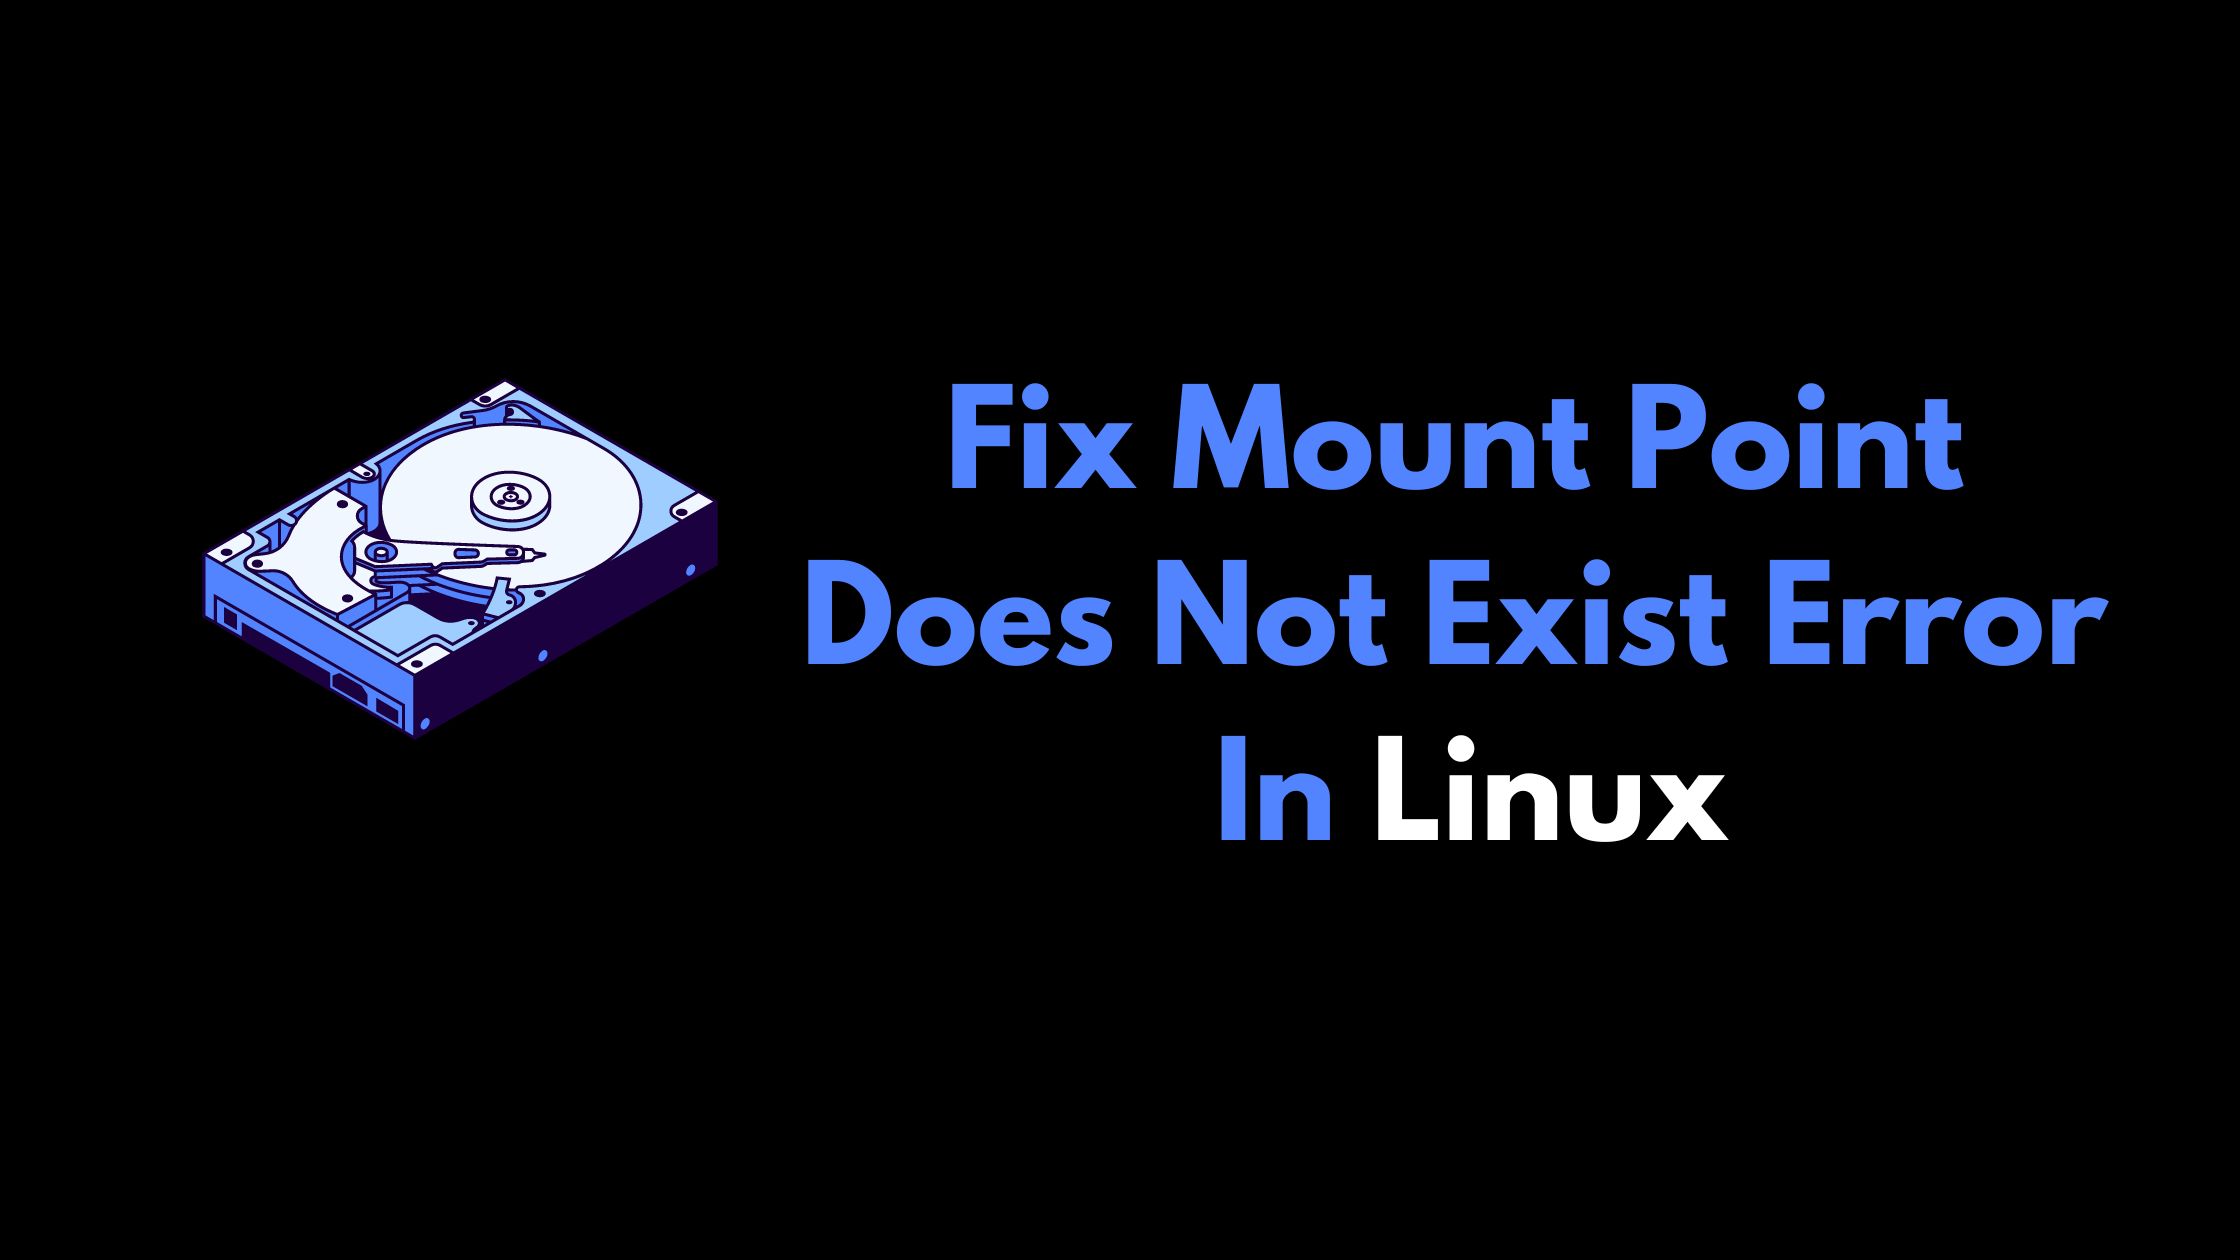 Fix Mount Point Does Not Exist Error In Linux